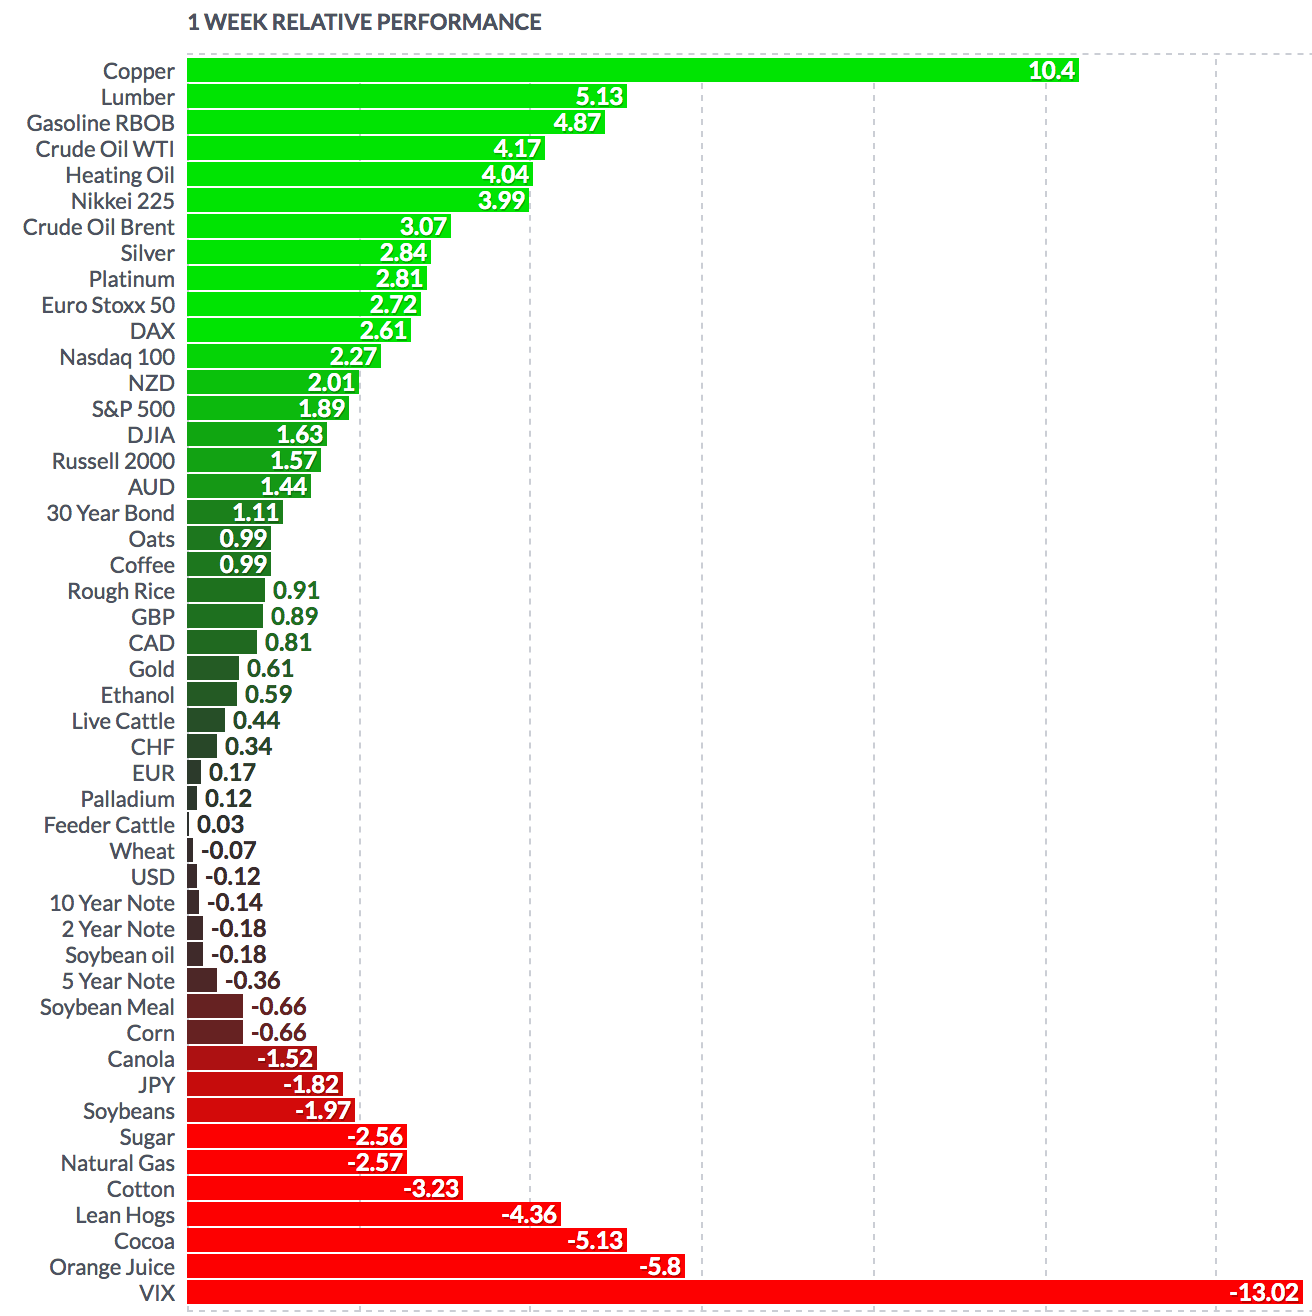 FUTURES Weekly Performance